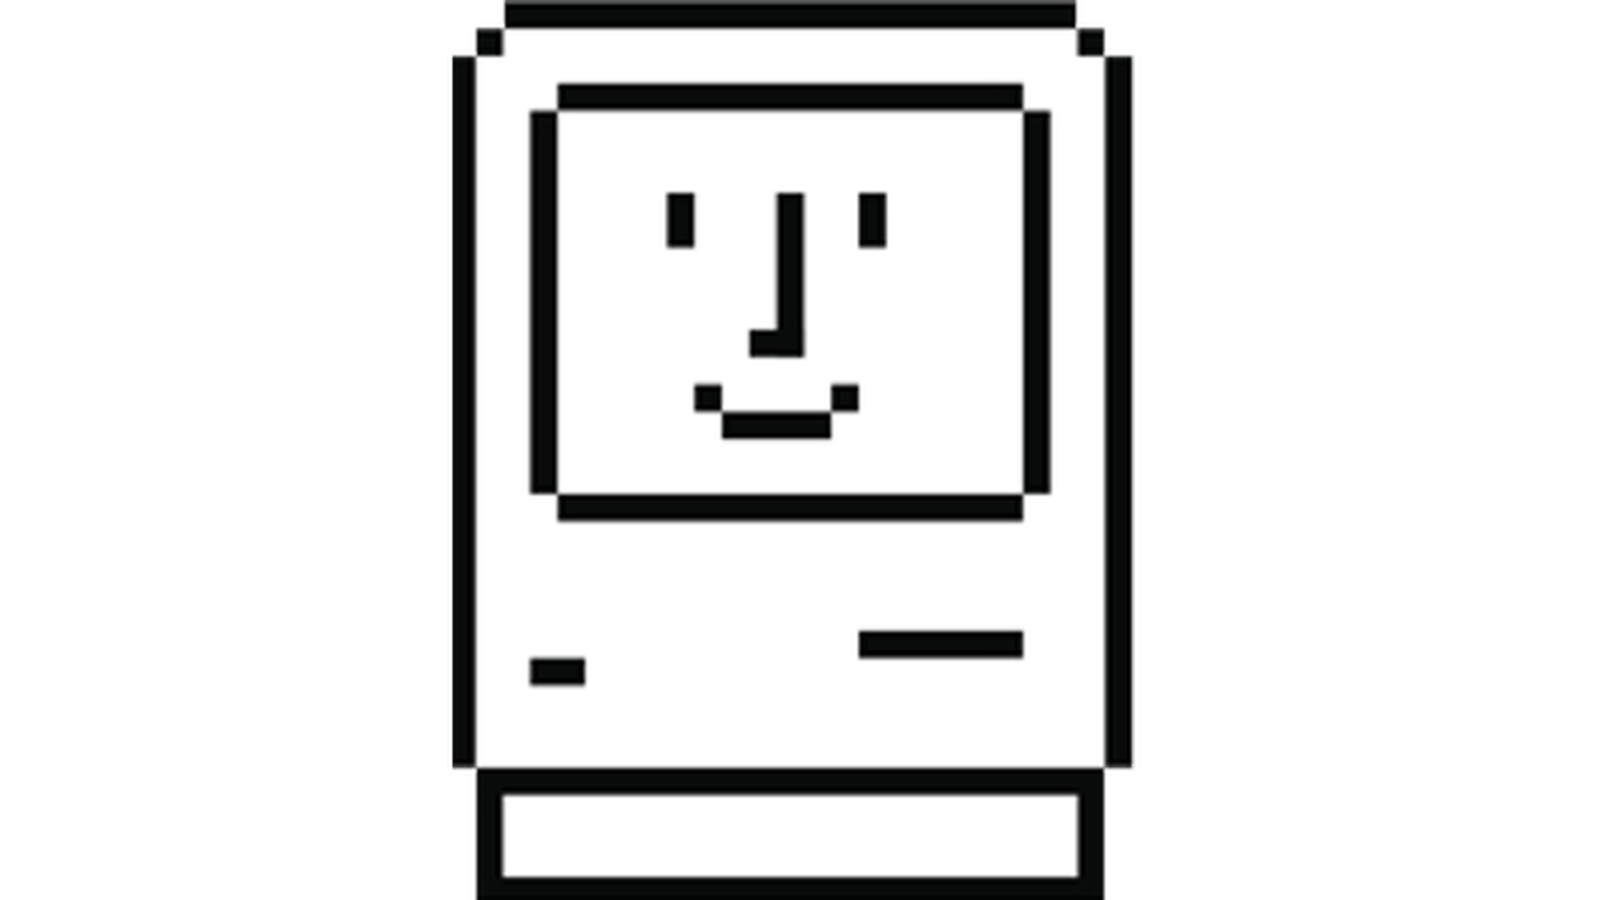 Happy Mac displayed while the computer was booting. Designed by Susan Kare